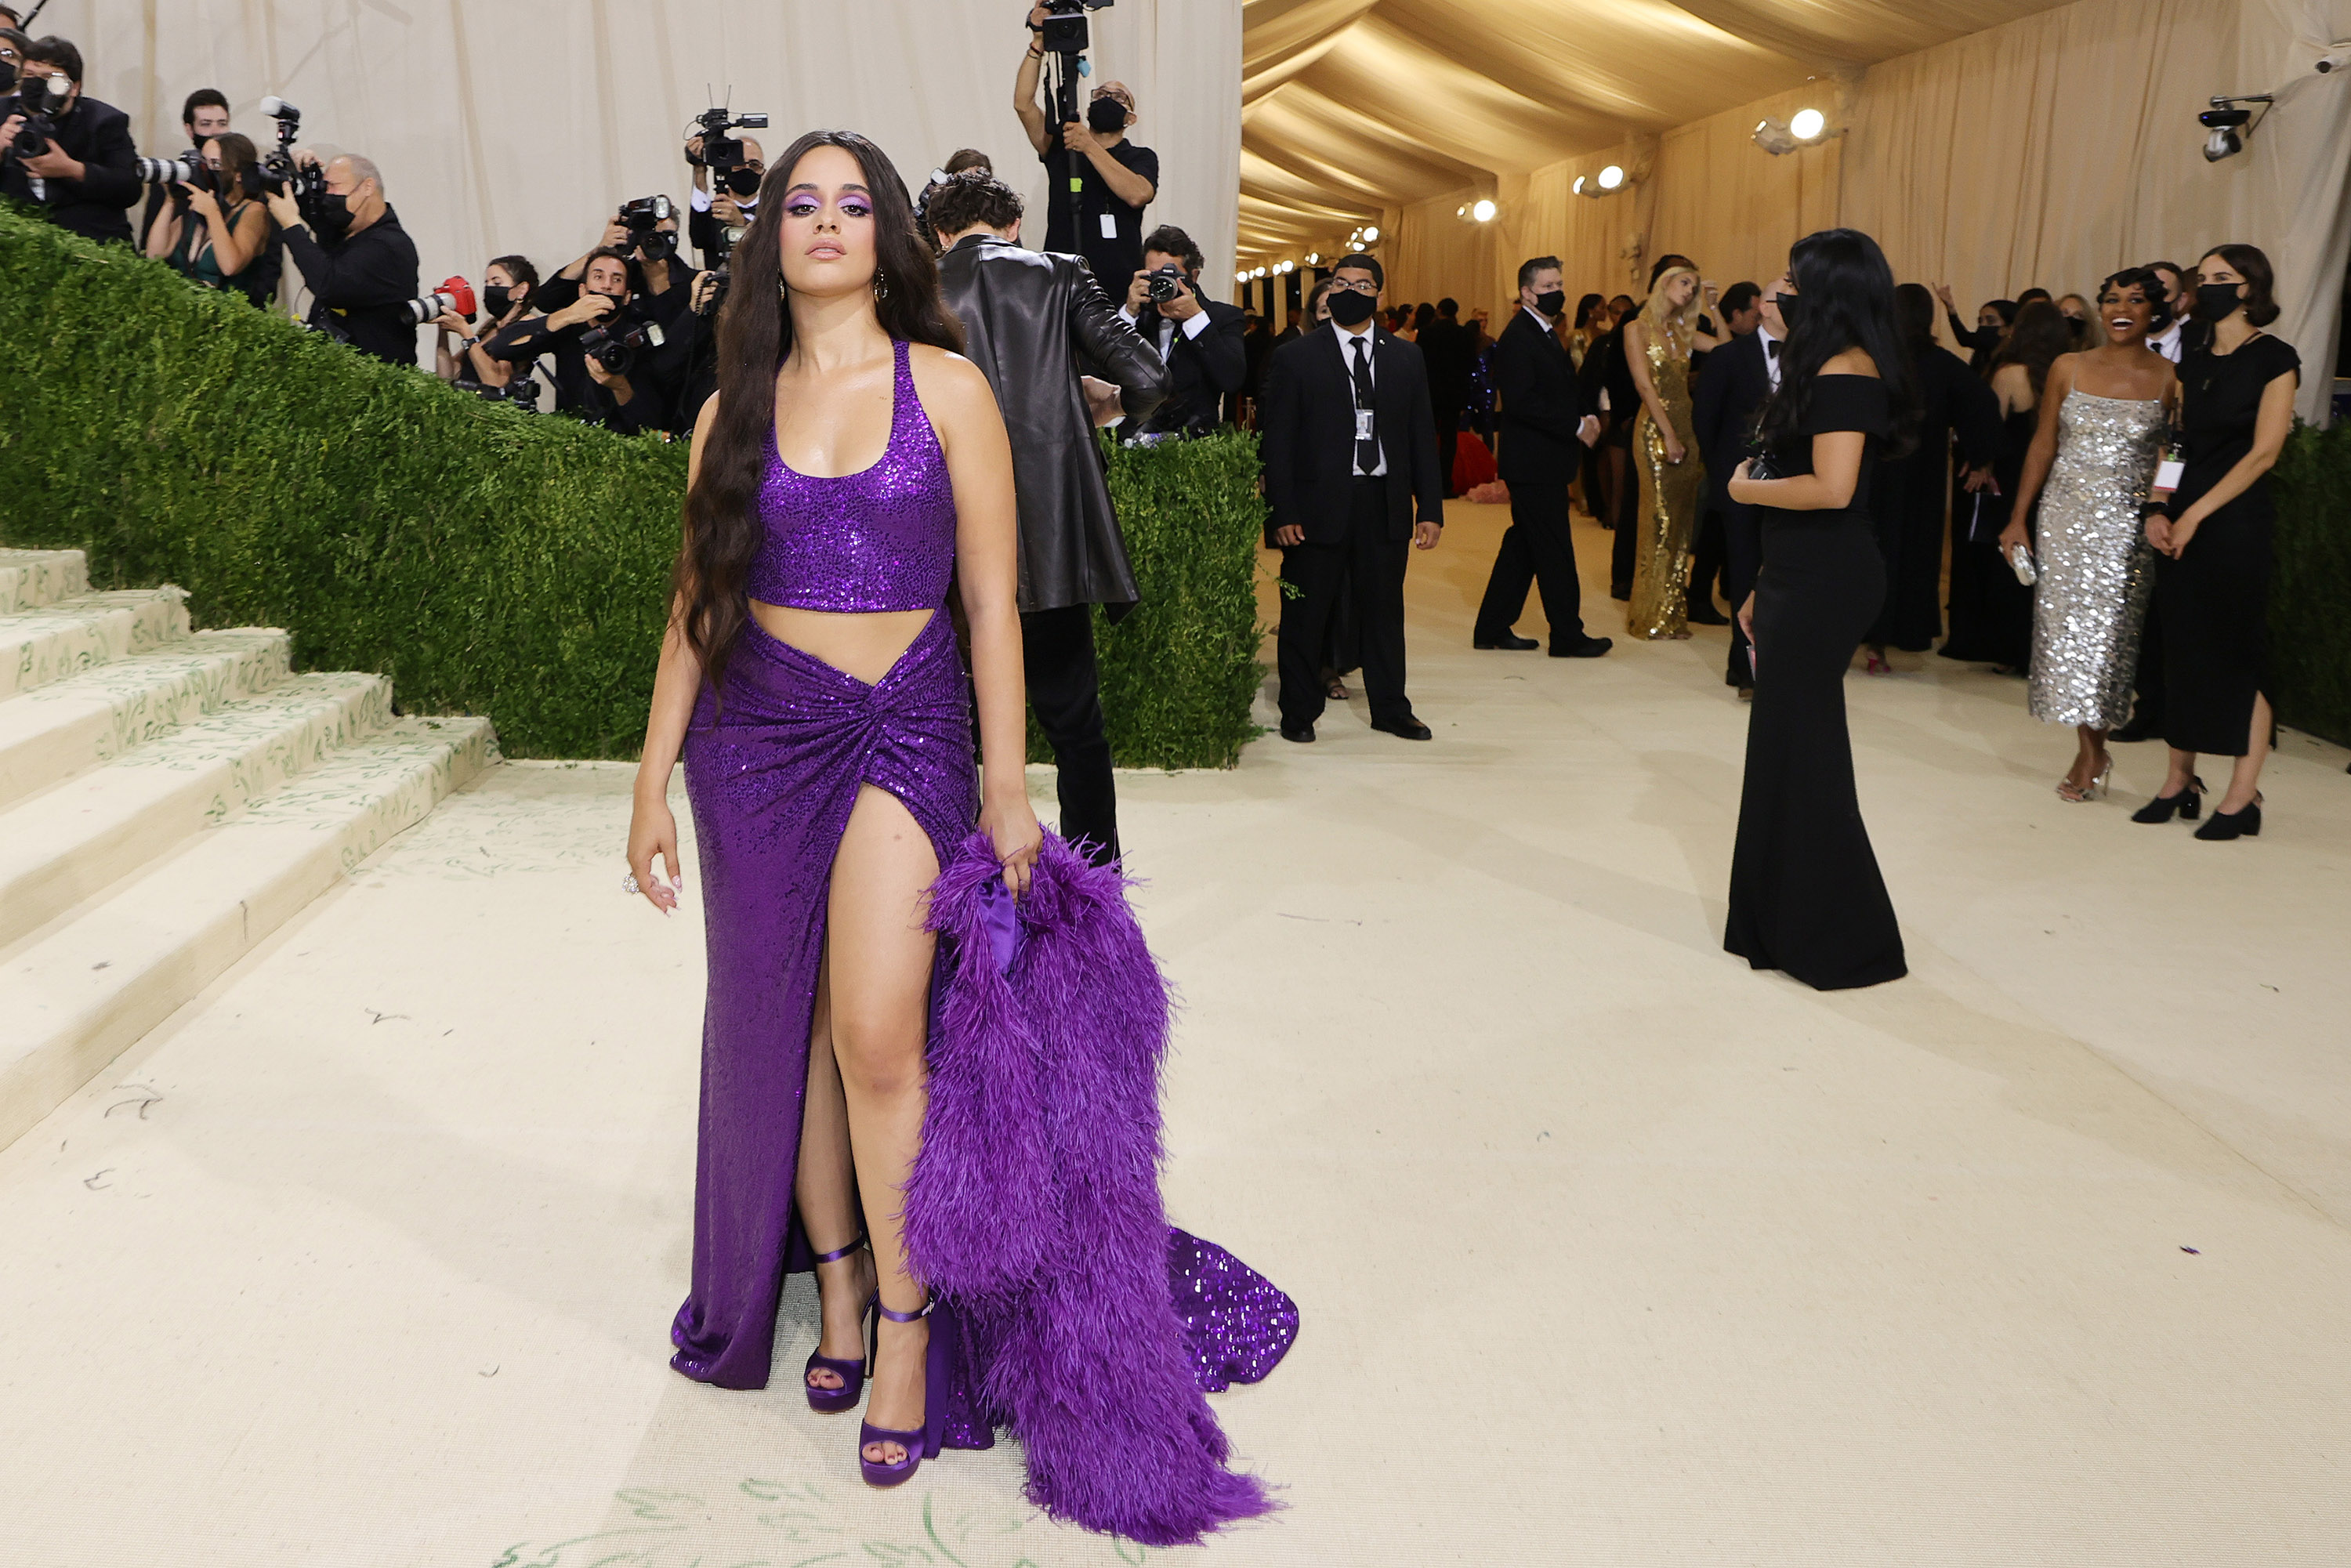 Camila Cabello attends the 2021 Met Gala Celebrating In America: A Lexicon Of Fashion at Metropolitan Museum of Art on Sept. 13, 2021, in New York City.